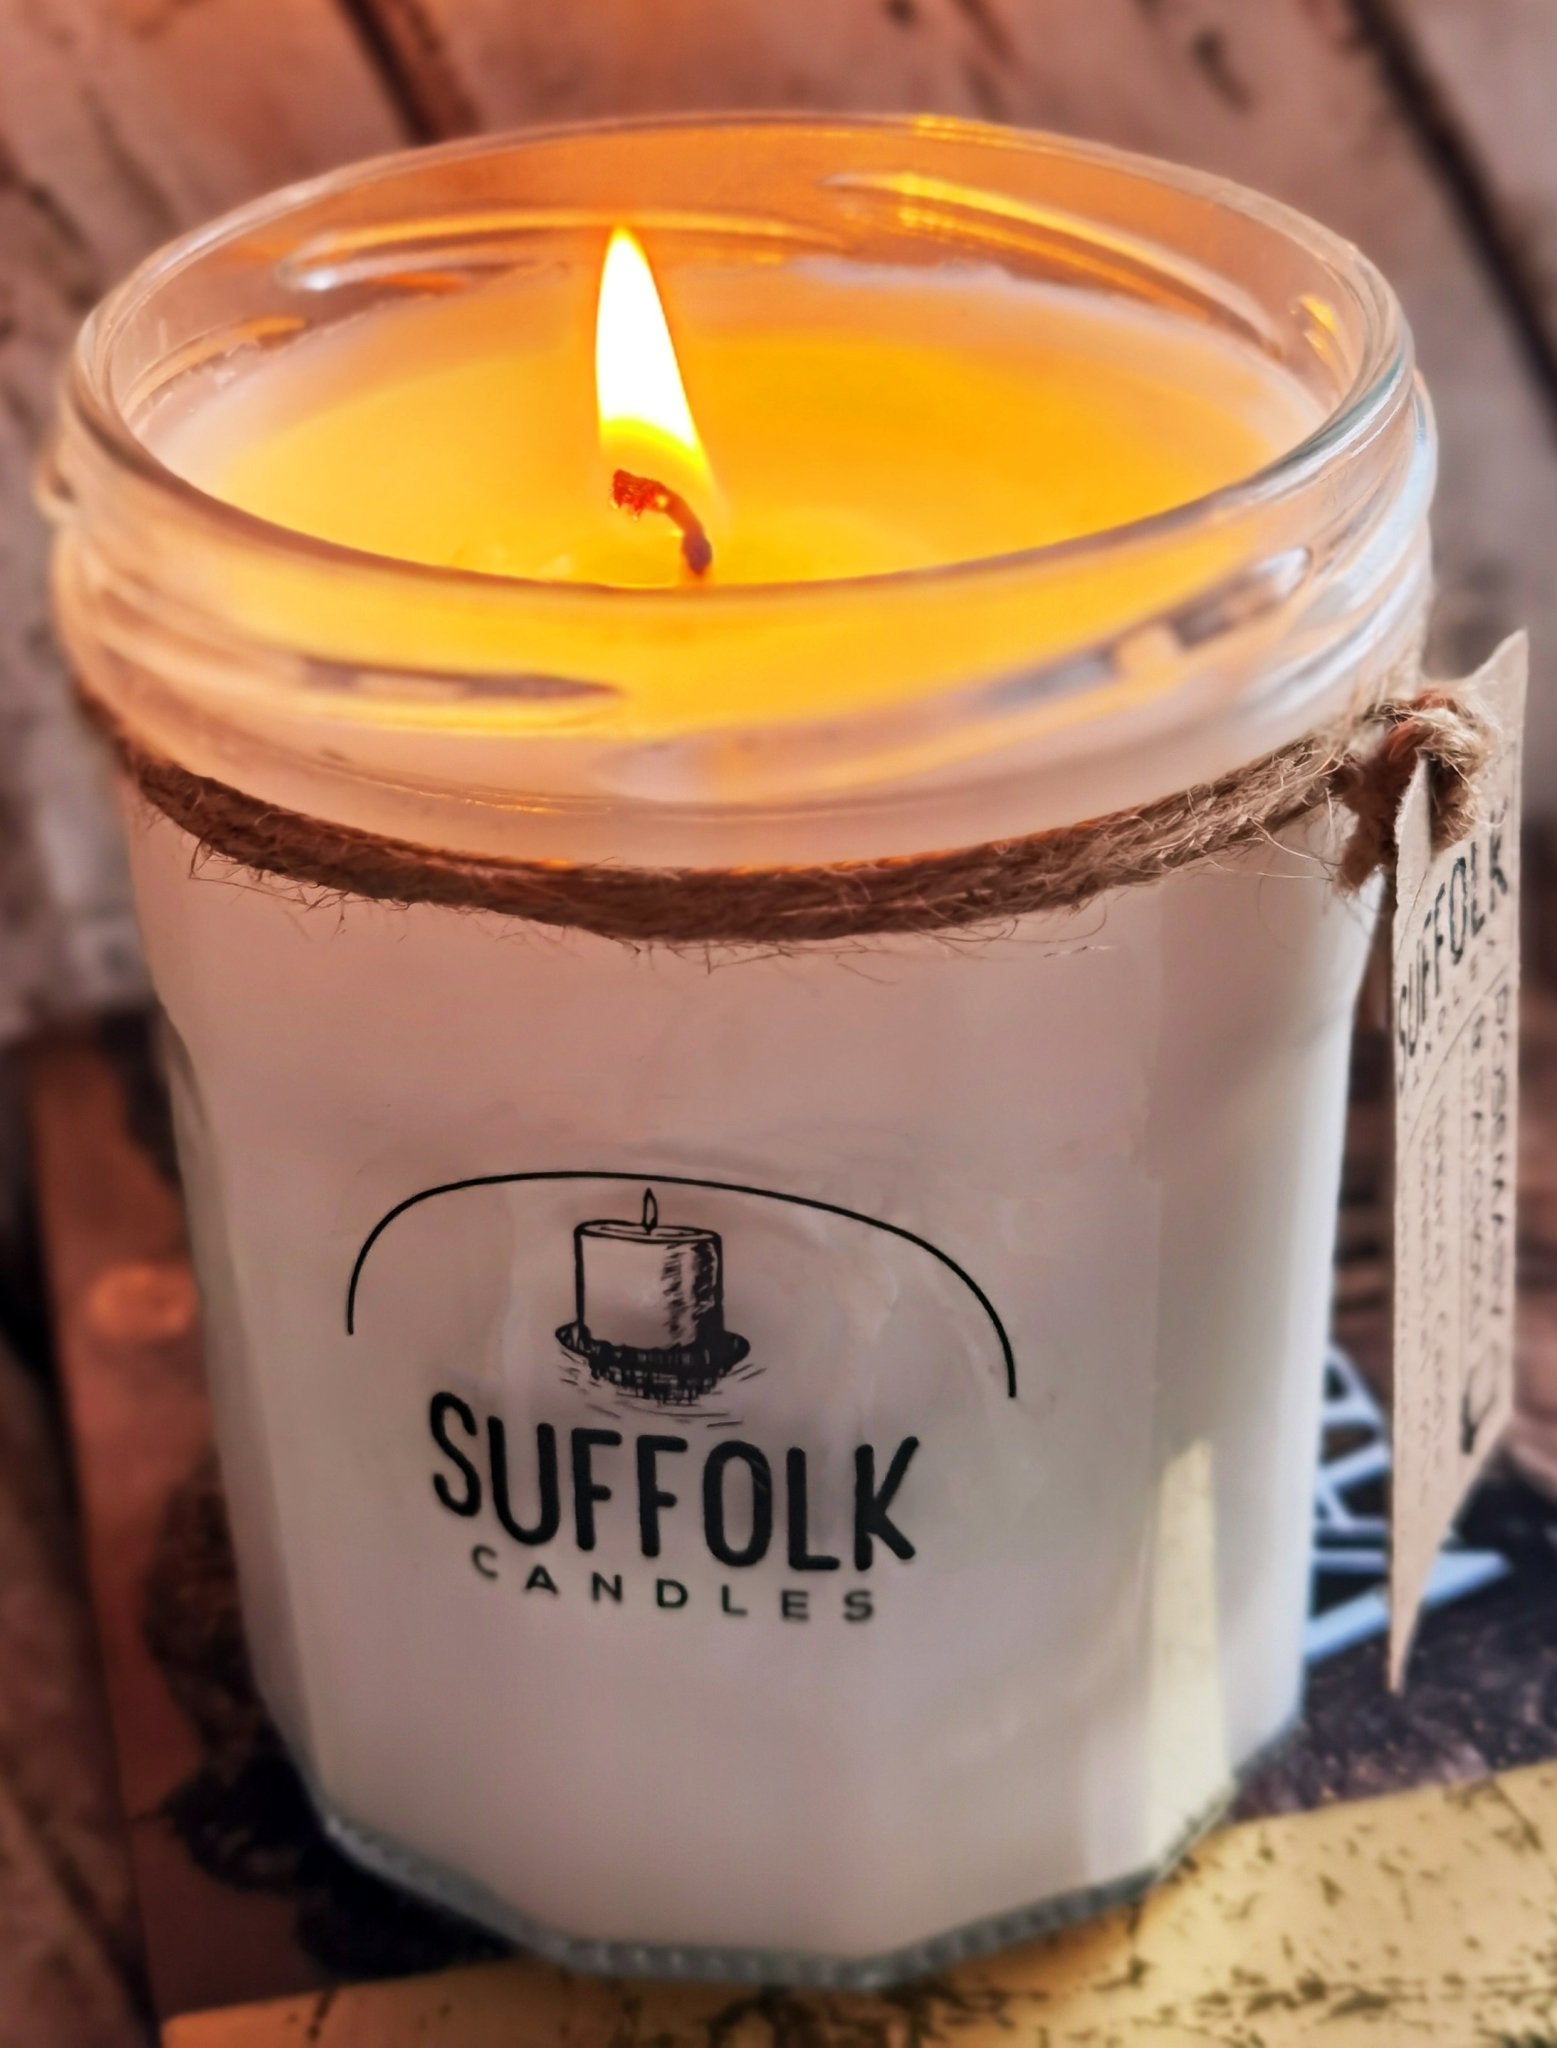 Best types of eco wax to use when making candles - Suffolk Candles